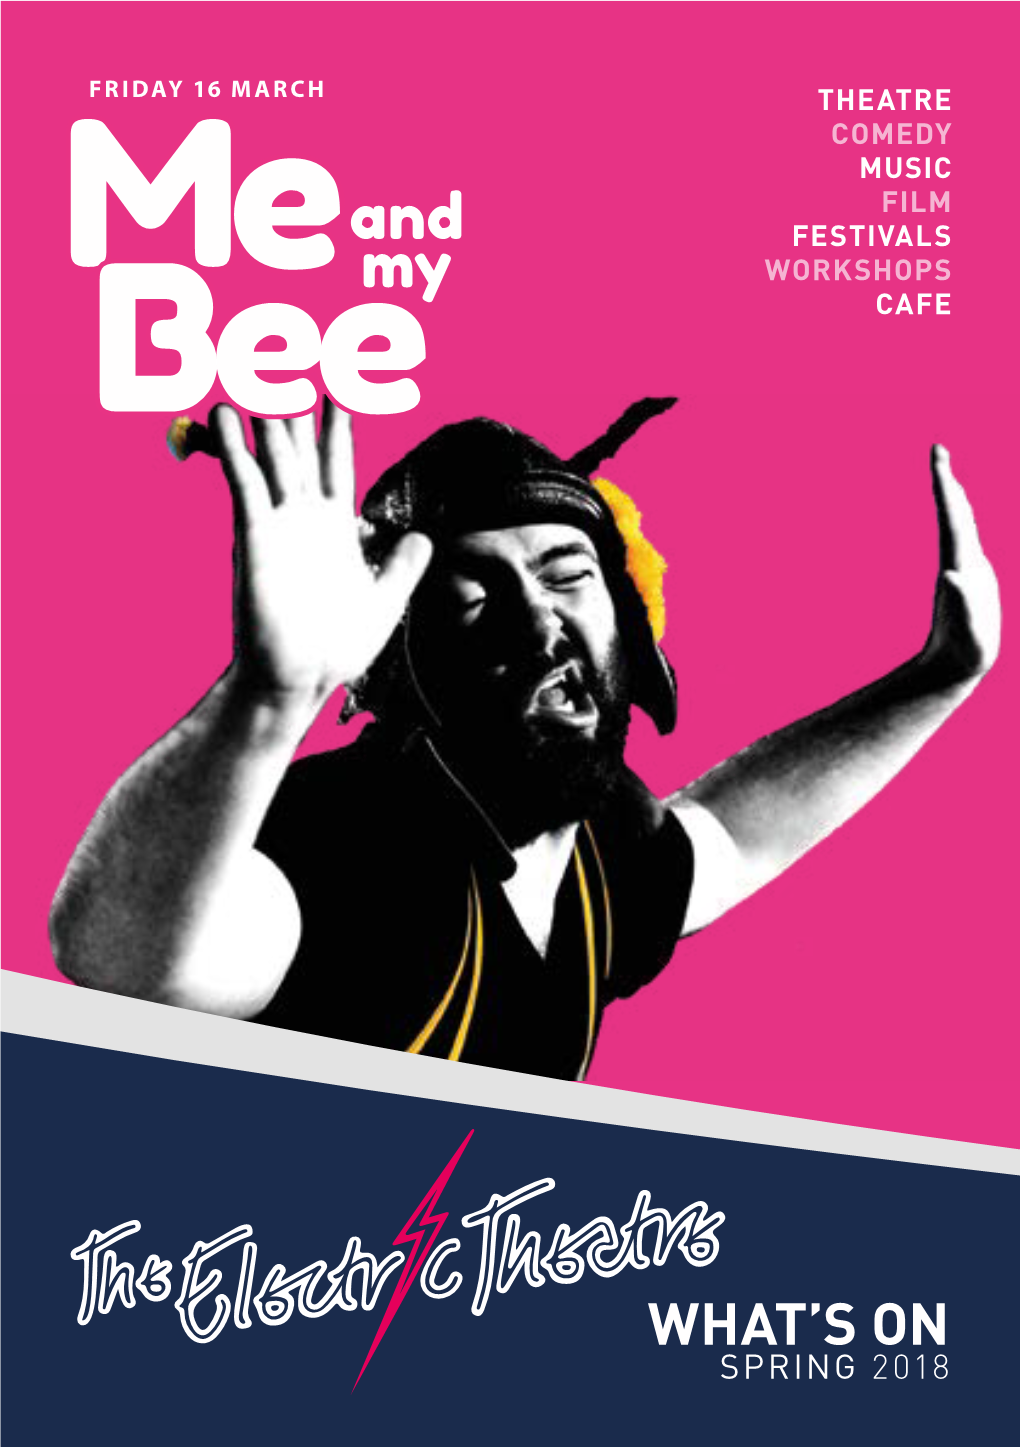 AND MY BEE 7Pm | Tickets £15, Under 16 £12 Climate Change Is Massive